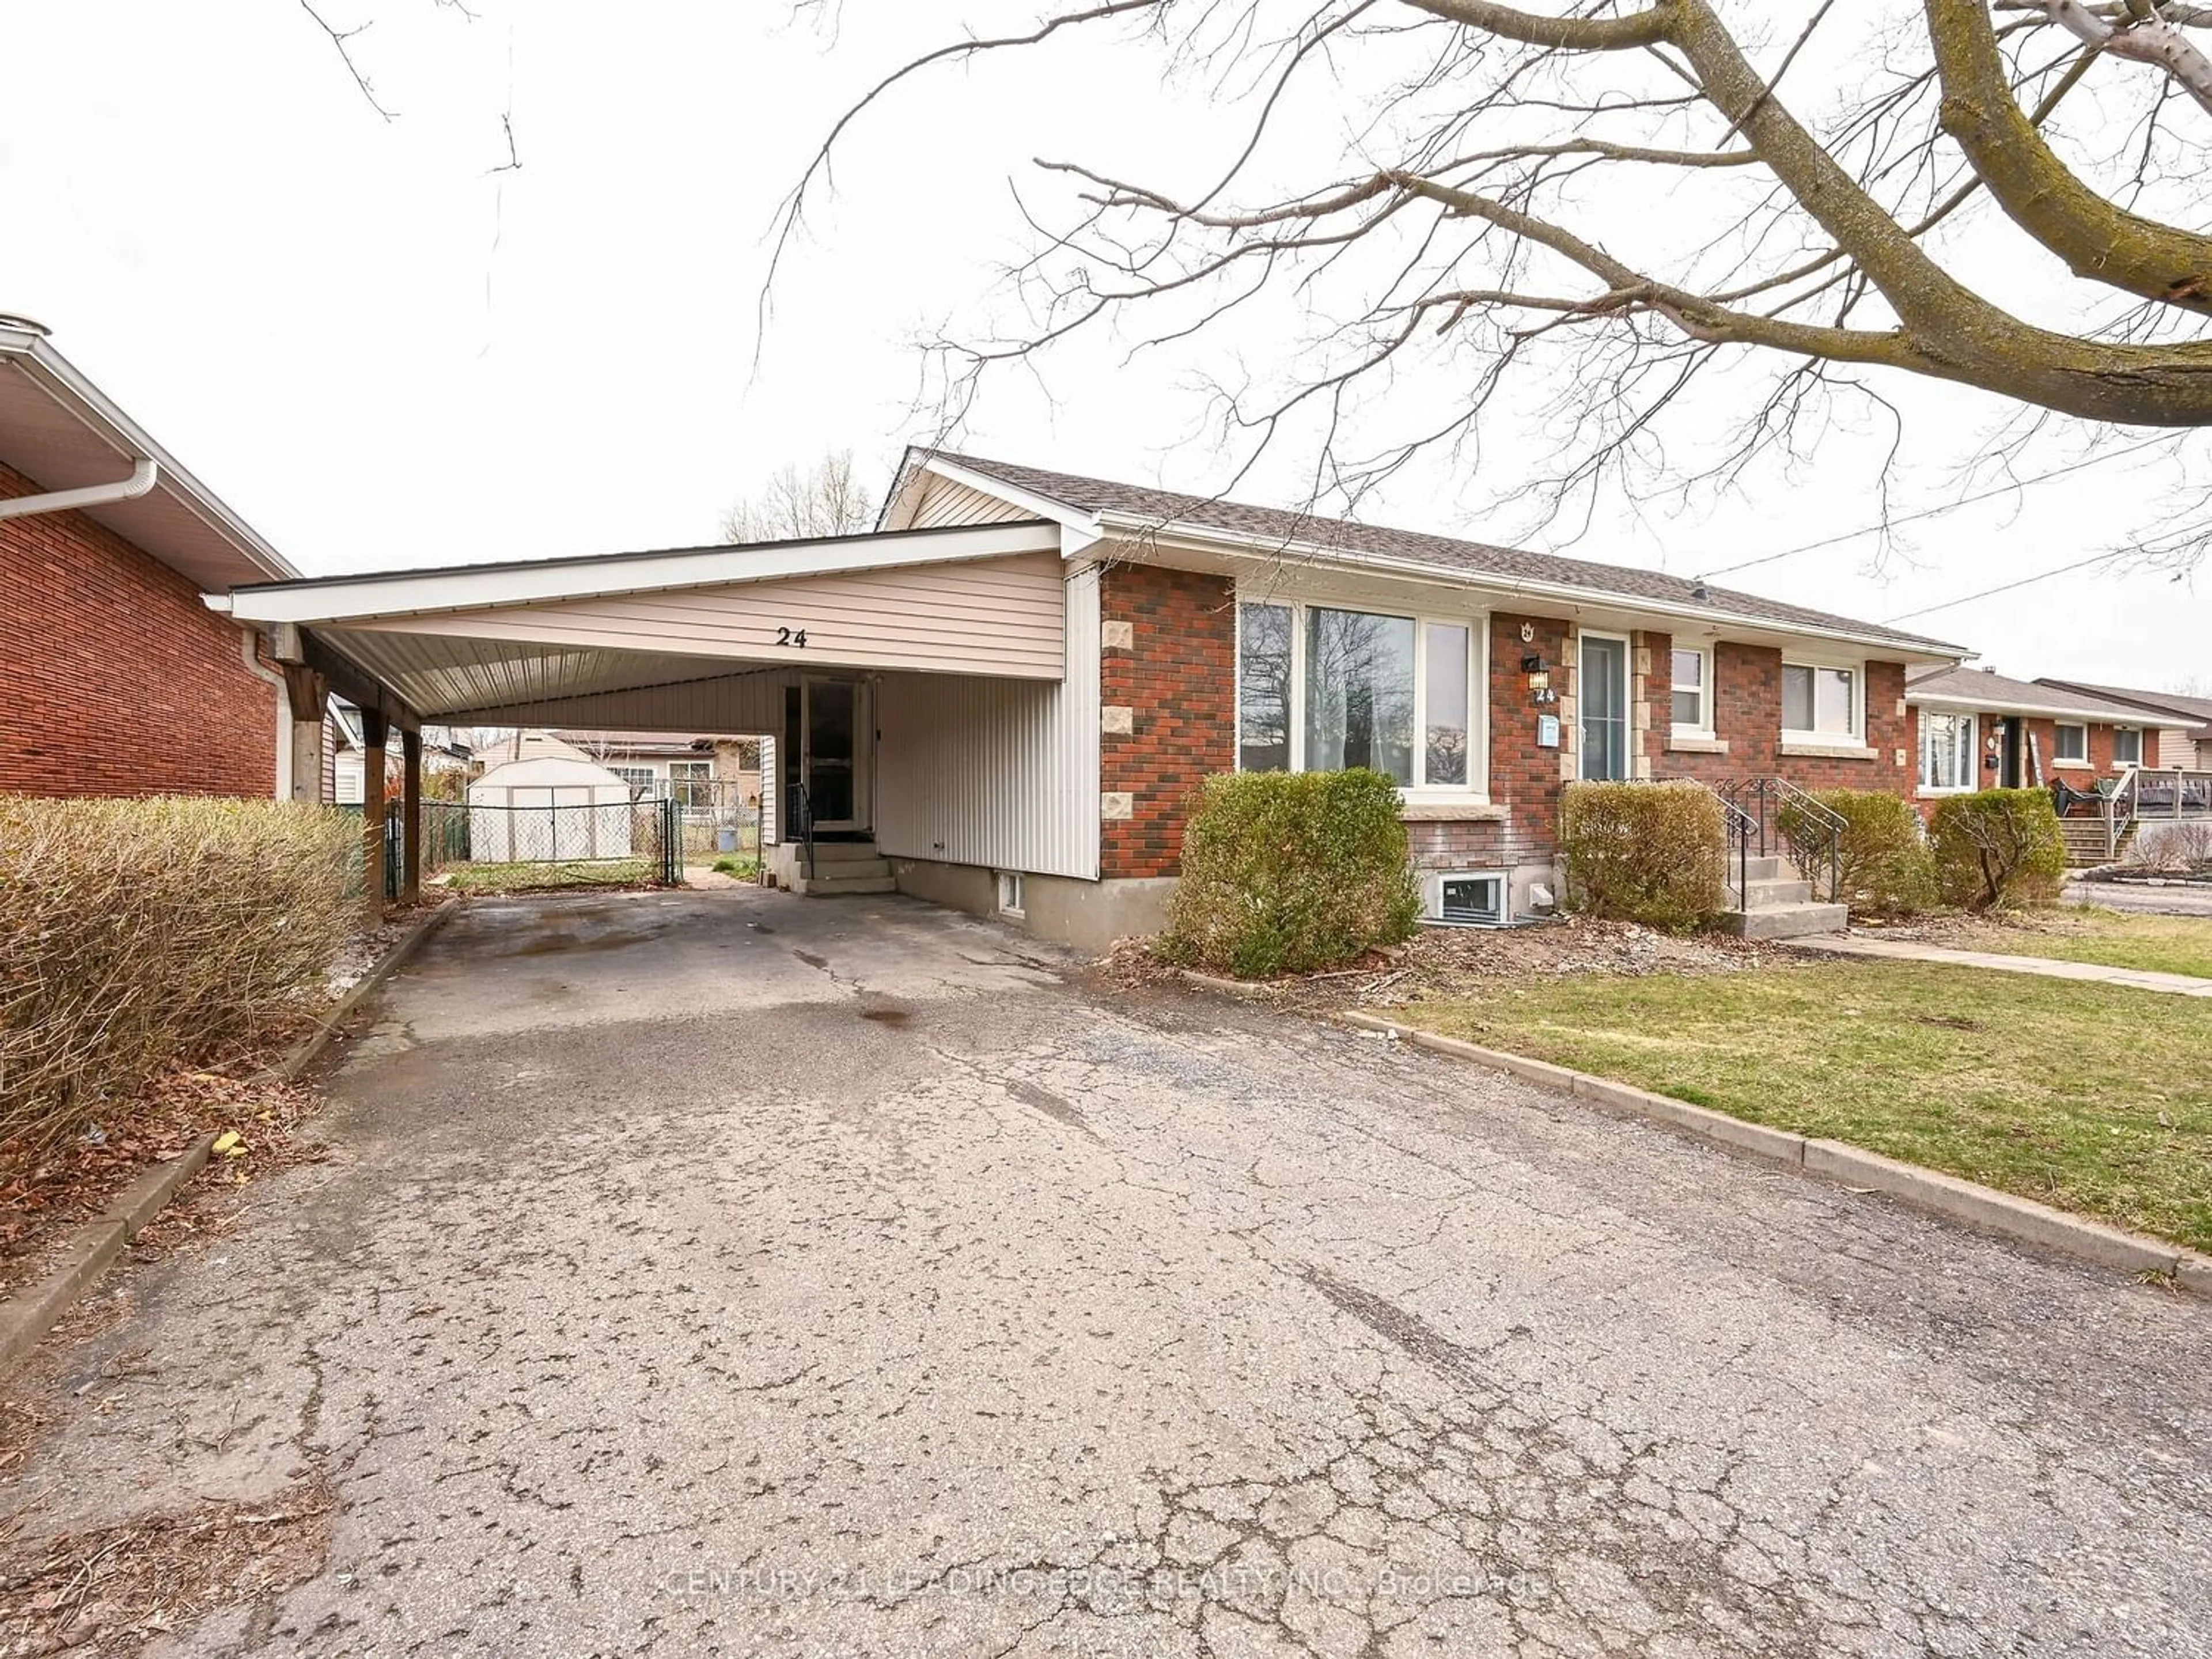 Frontside or backside of a home for 24 Ridgeview Ave, St. Catharines Ontario L2M 6B3